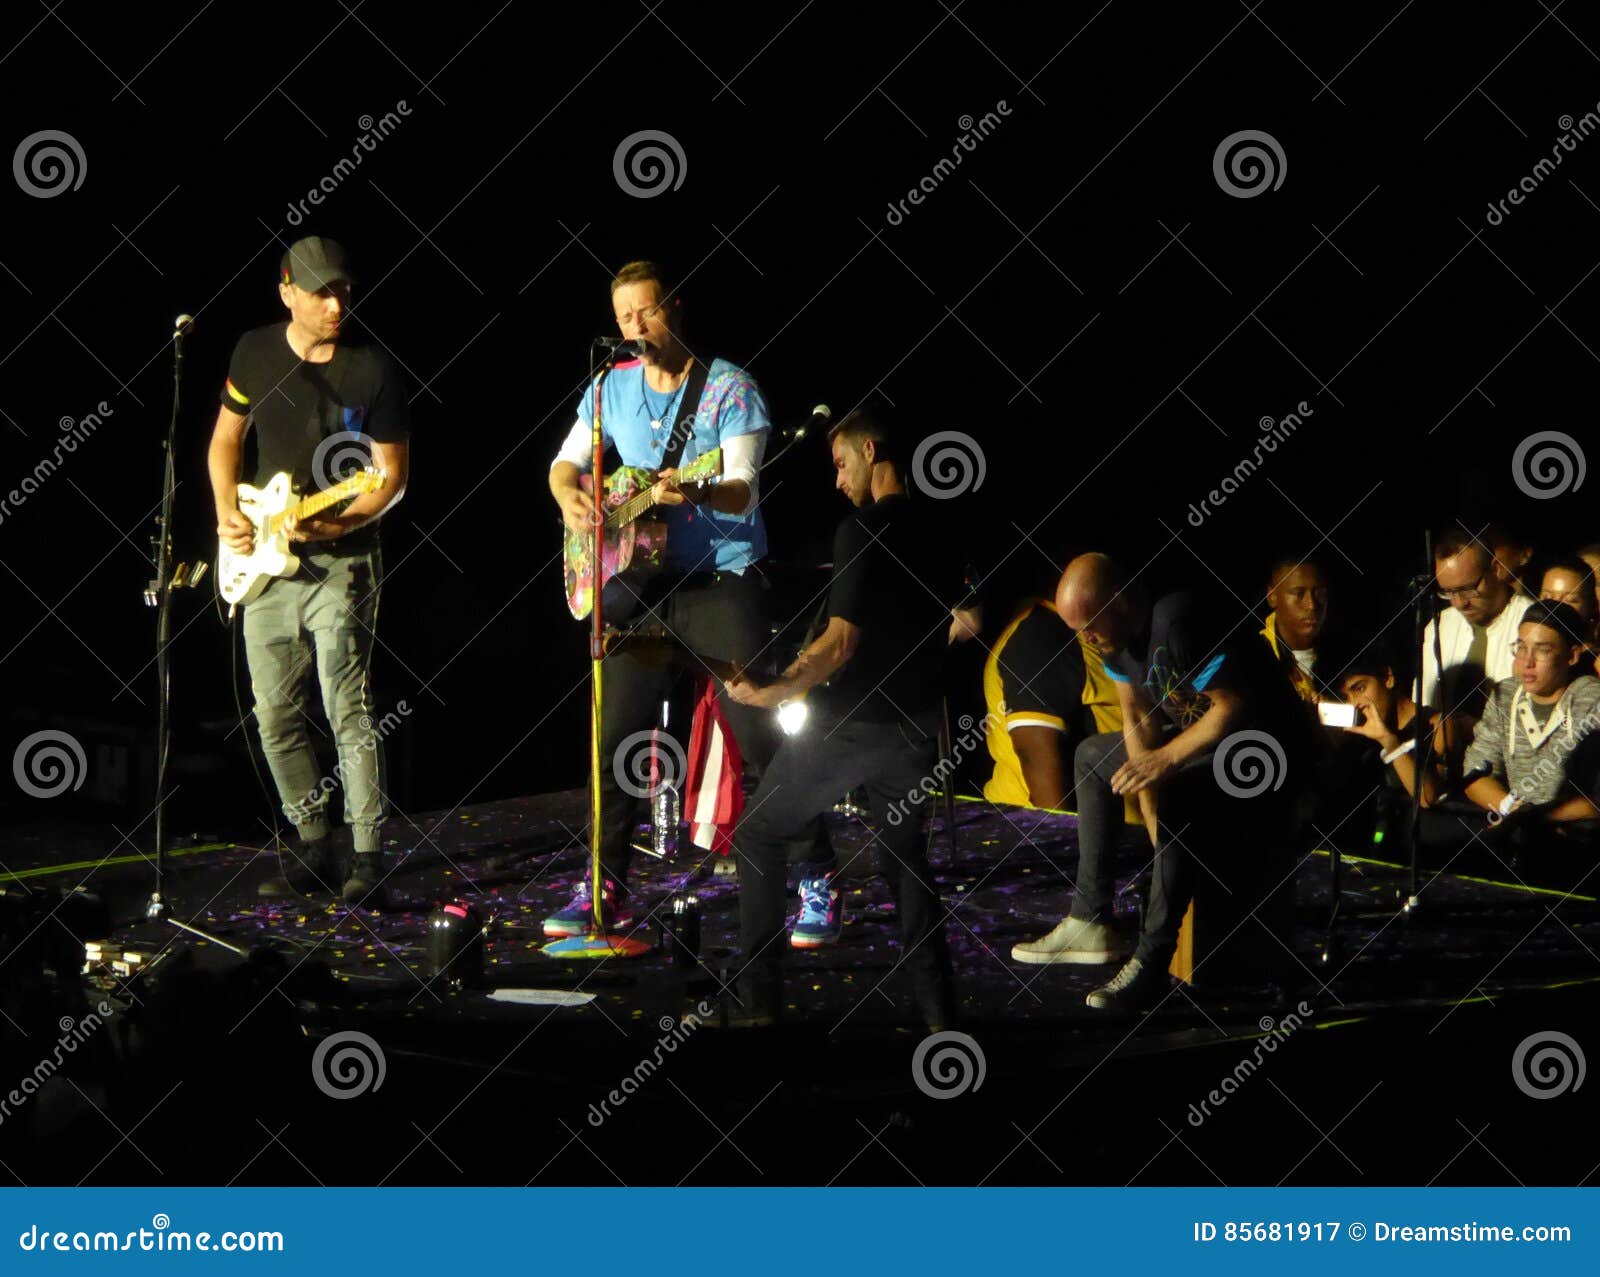 Photo of Will CHAMPION and Guy BERRYMAN and COLDPLAY and Chris